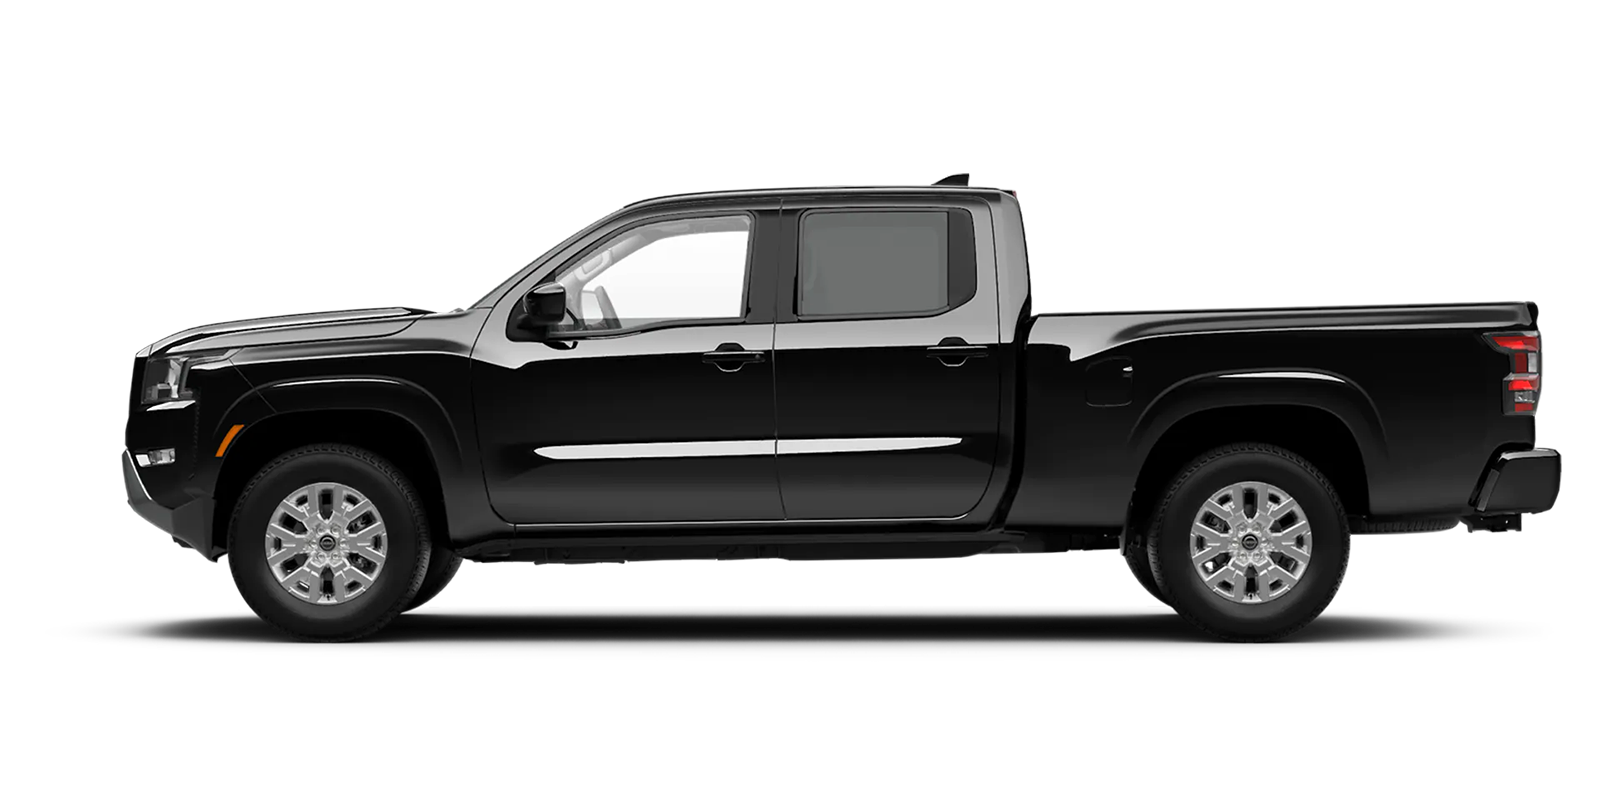 2022 Frontier Crew Cab Long Bed SV 4x2 in Super Black | San Leandro Nissan in San Leandro CA